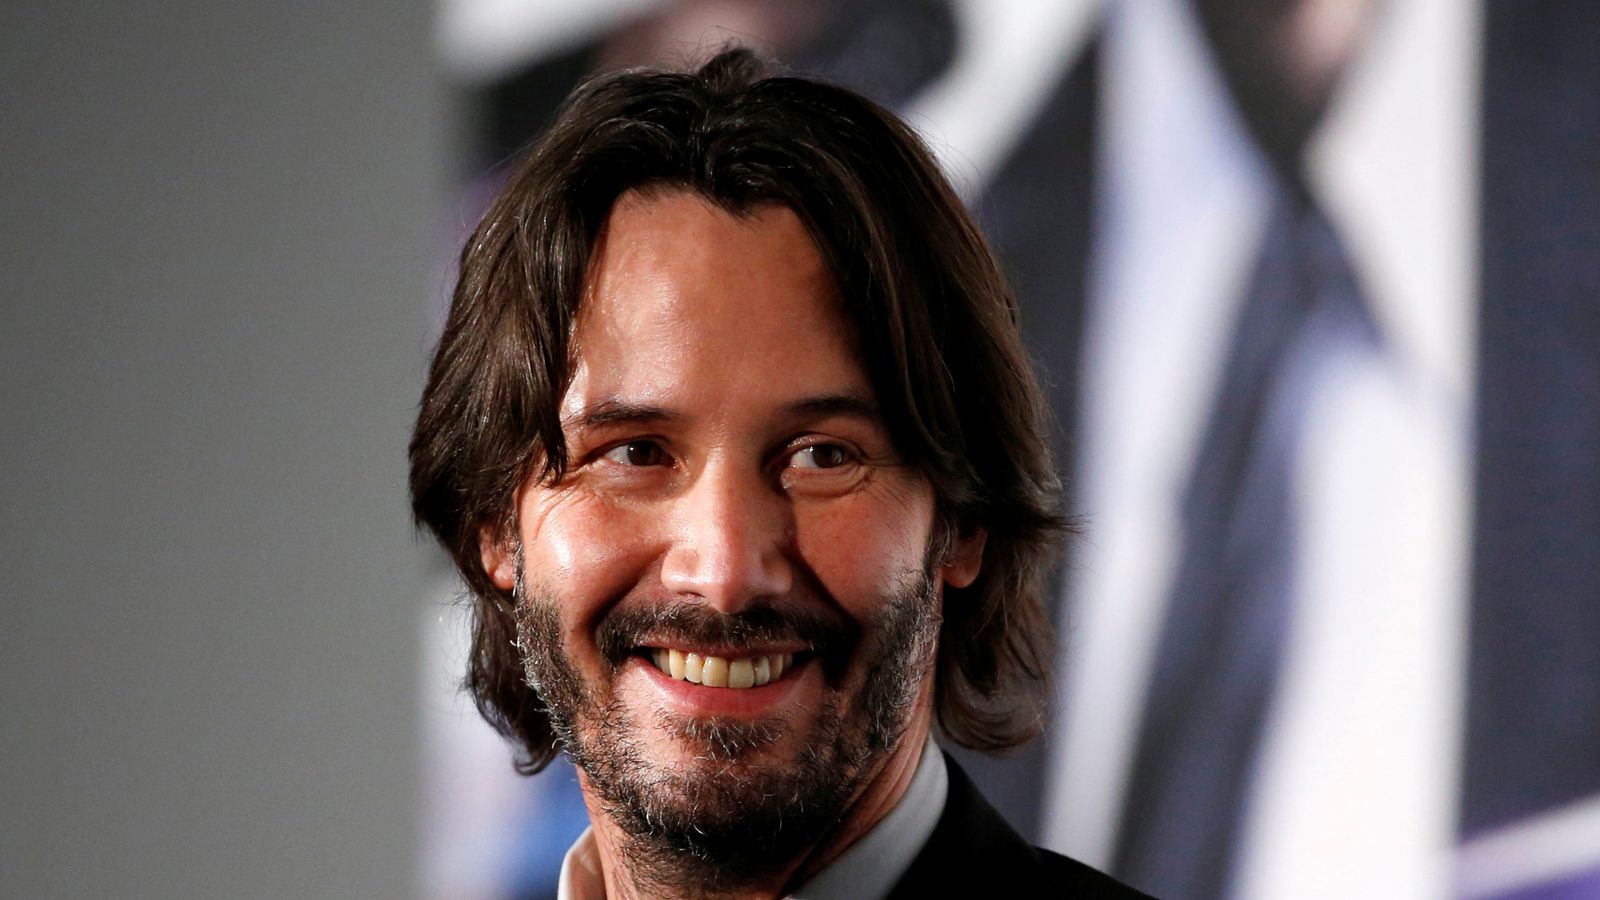 Keanu Reeves has 'great part' in Toy Story 4 | Ents & Arts News | Sky News